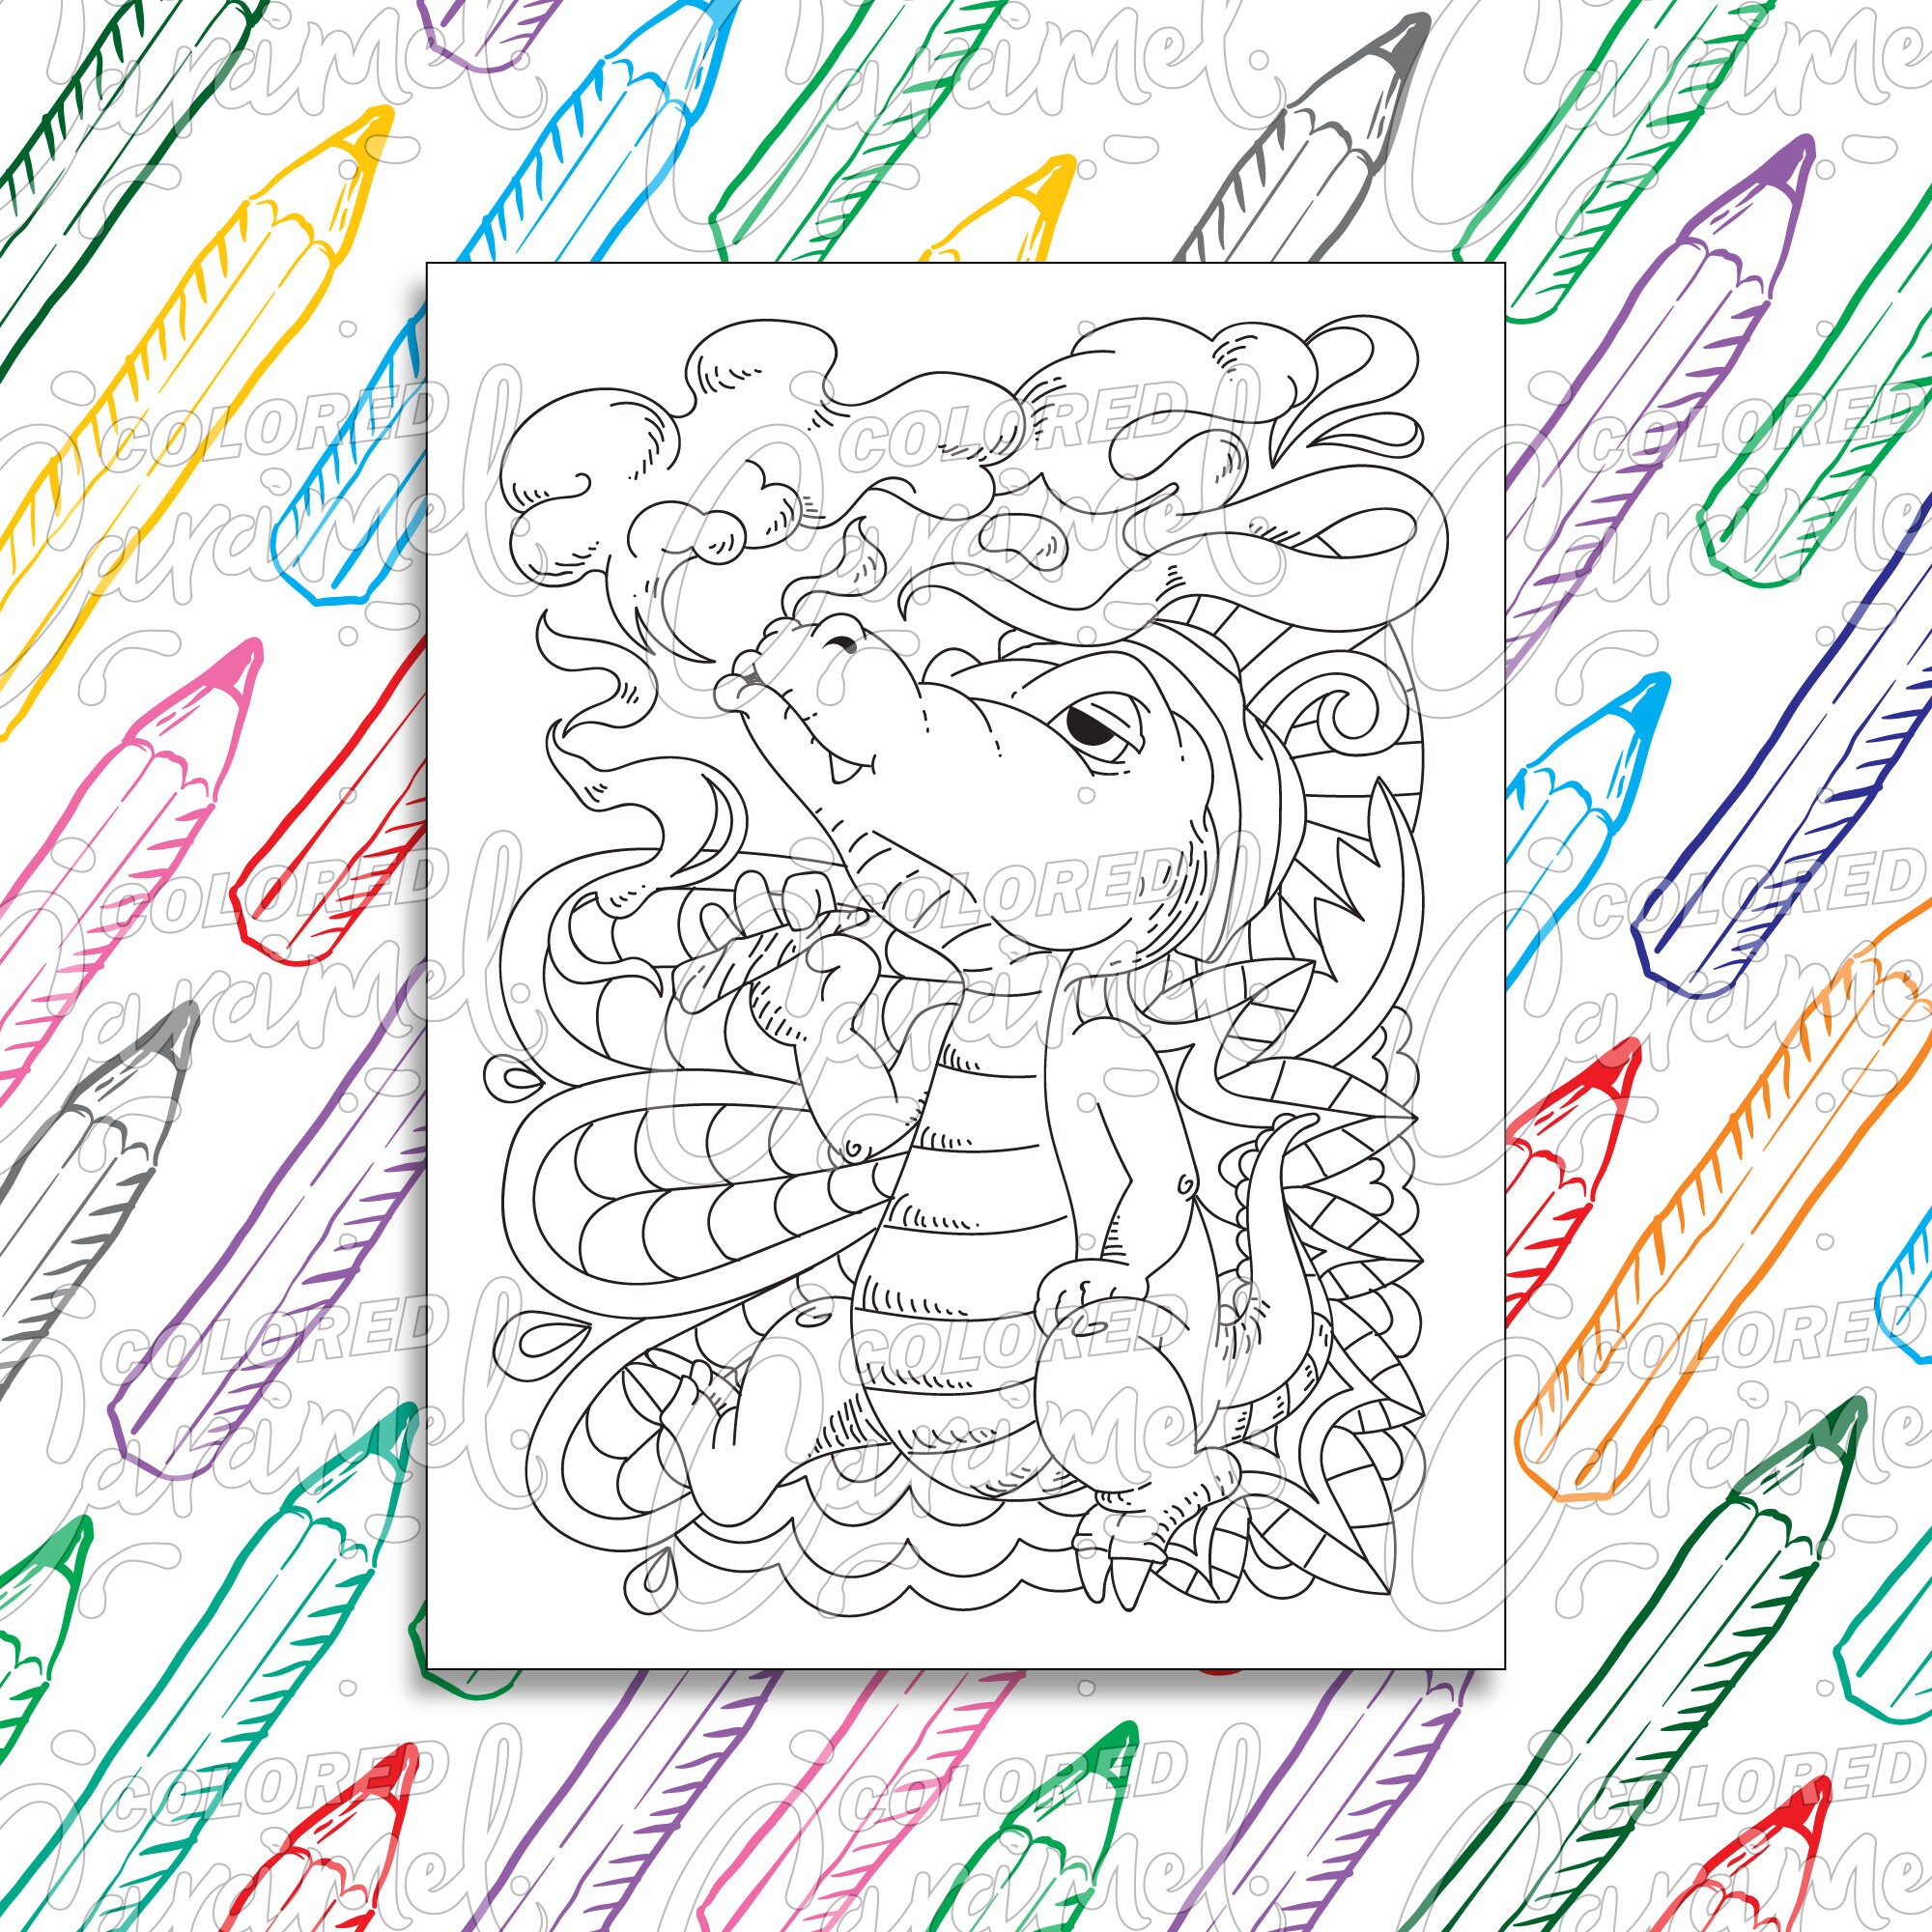 Stoner Coloring Page Digital Download PDF, Trippy, Funny and Cool Crocodile Smoking Weed, Printable Psychedelic Drawing & Illustration